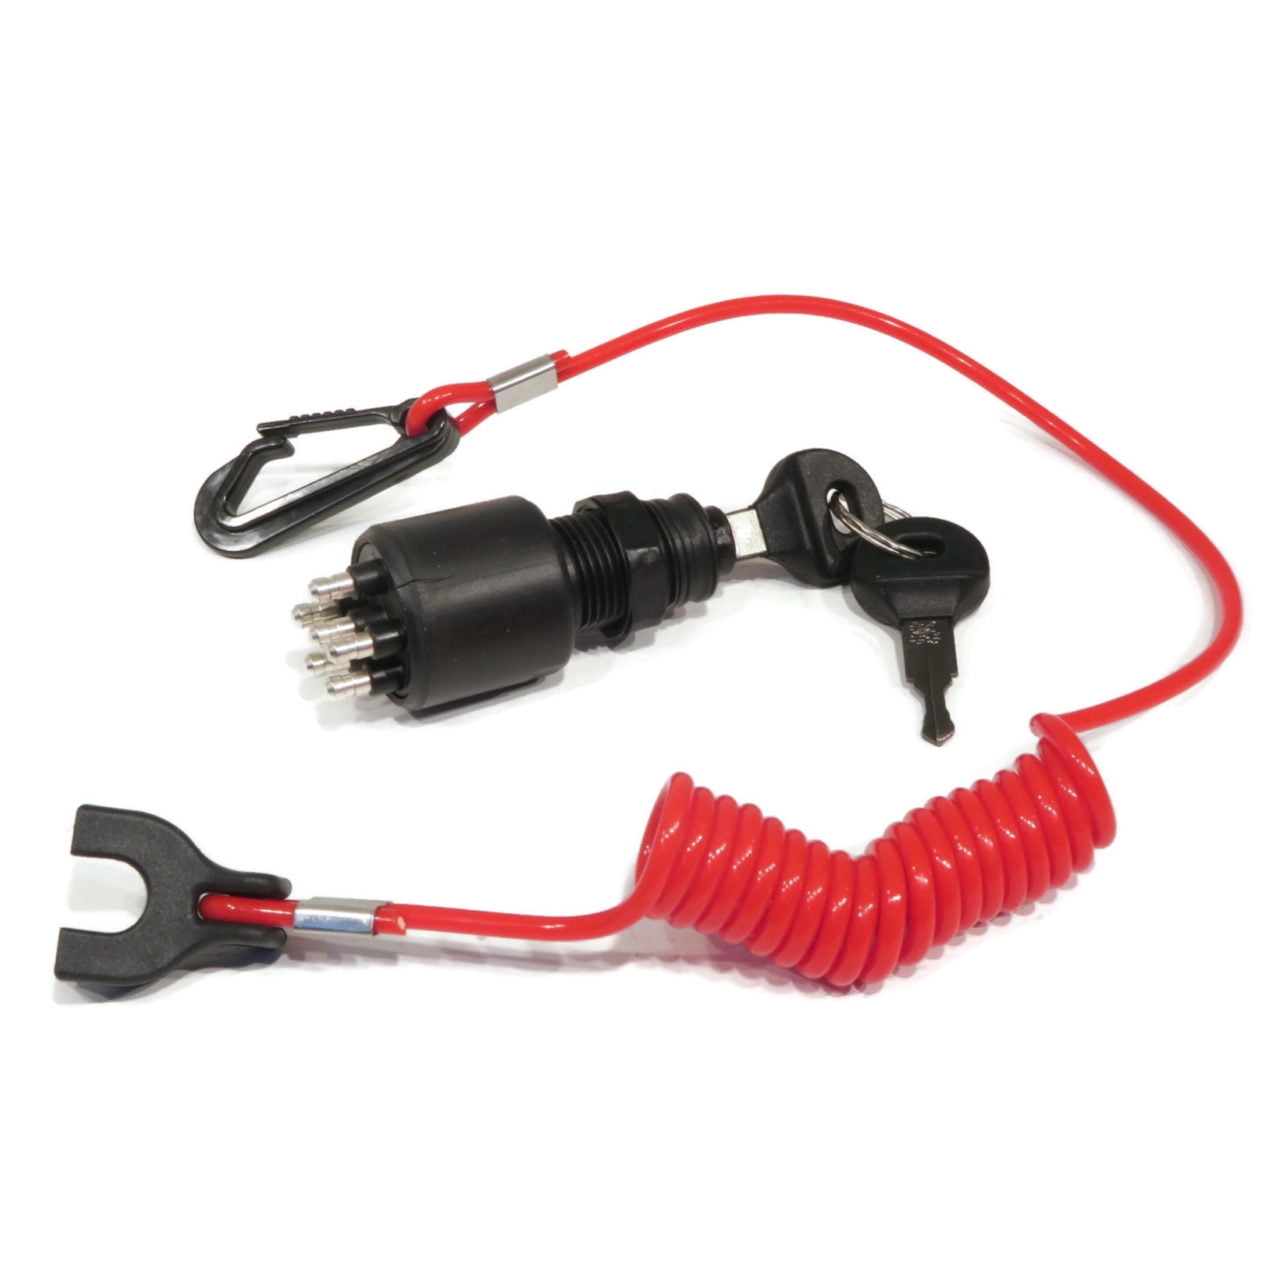 RED 8MM PERFORMANCE IGNITION LEAD OUTBOARD EVINRUDE JOHNSON 4"INCH LONG QUALITY 